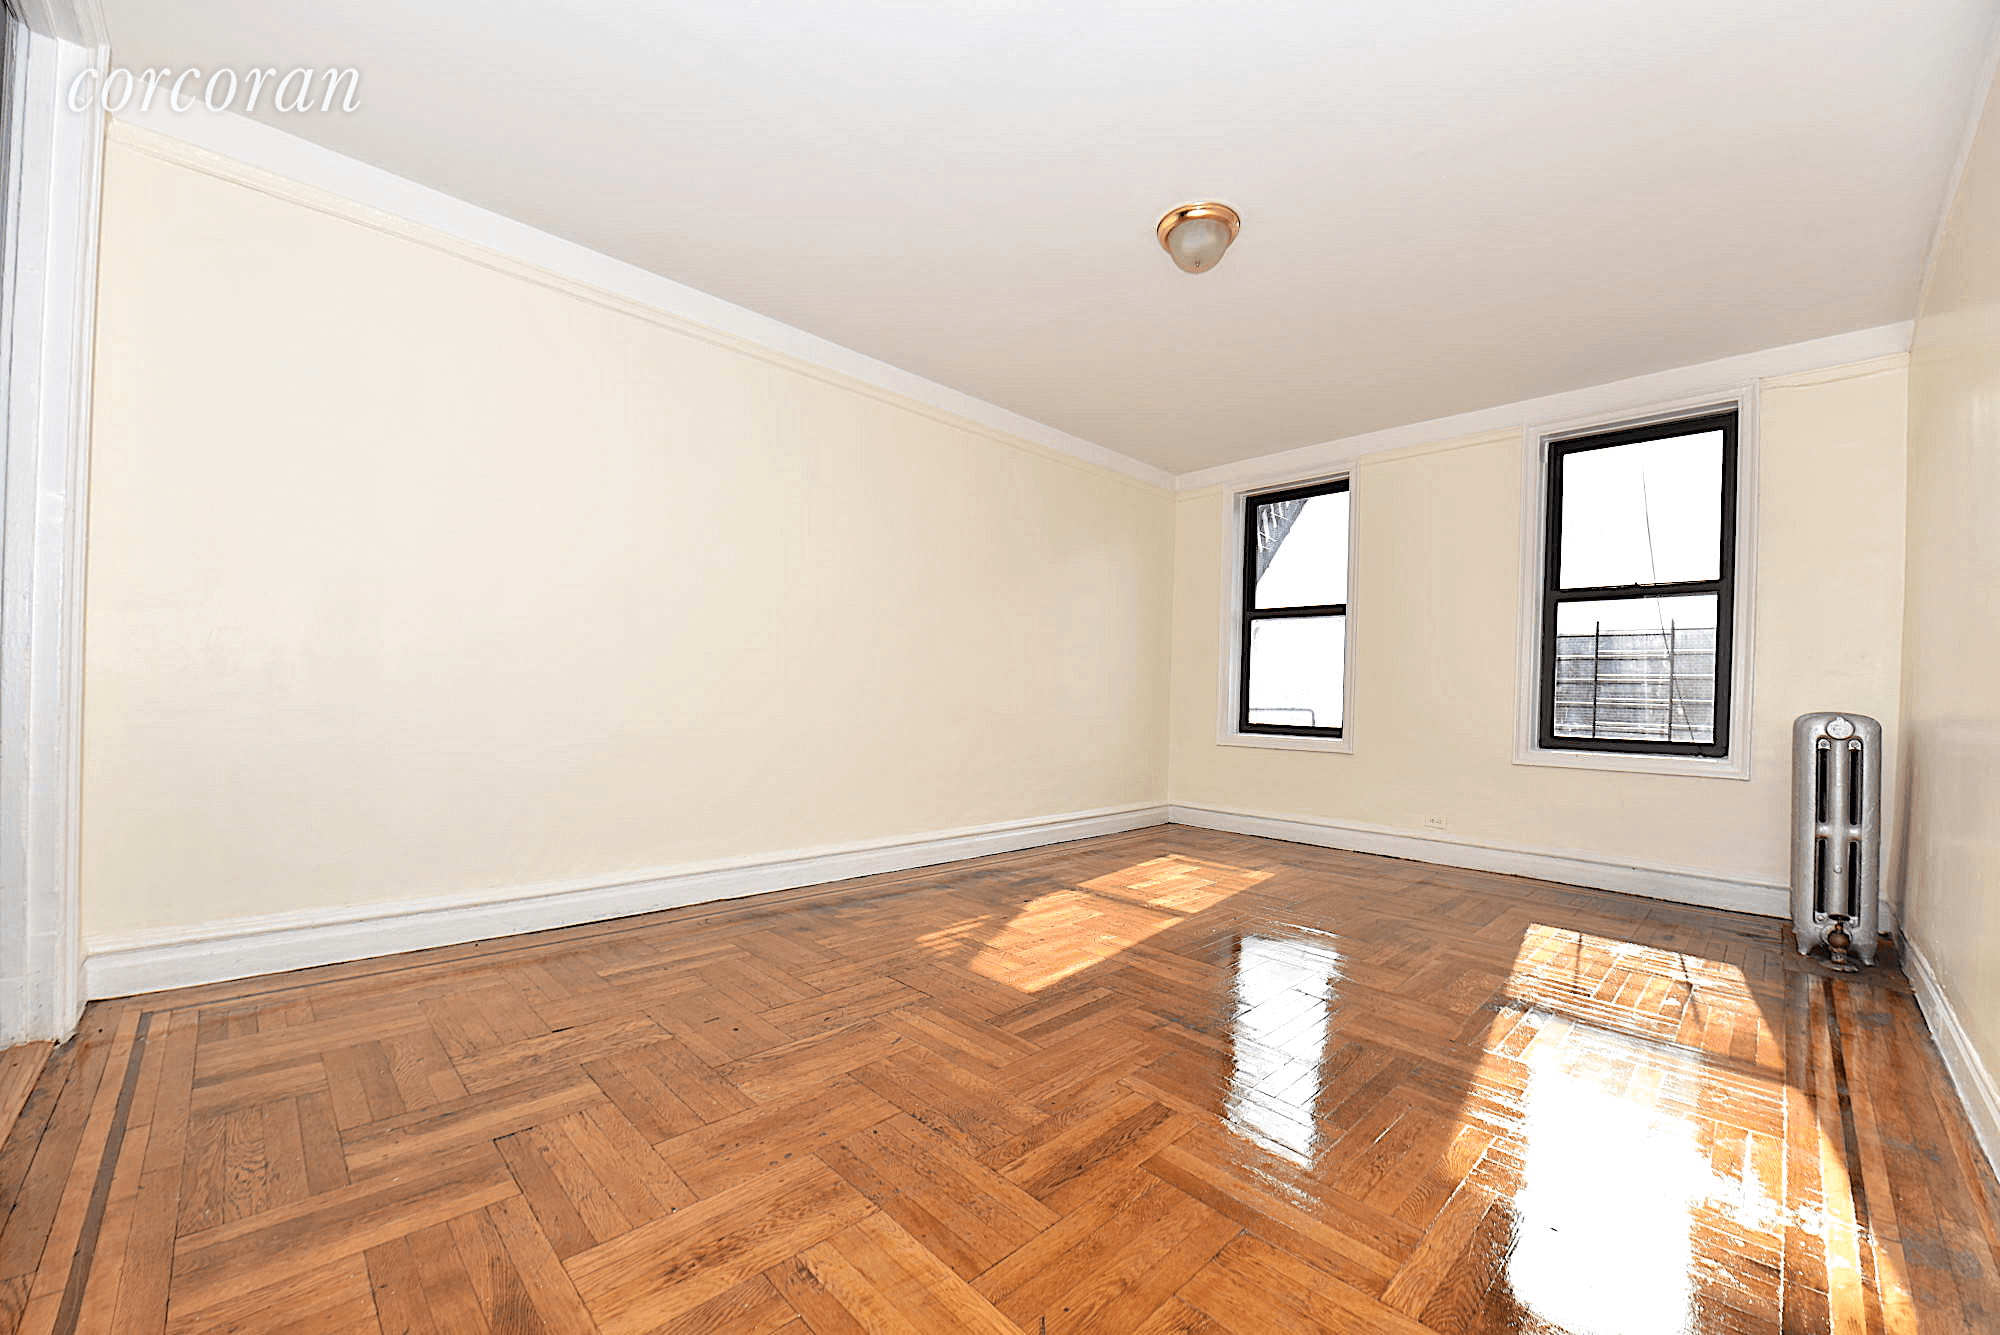 RENOVATED ! This spacious three bedroom one bathroom apartment offers hardwood floors, massive living room, king size bedrooms with lots of natural light.